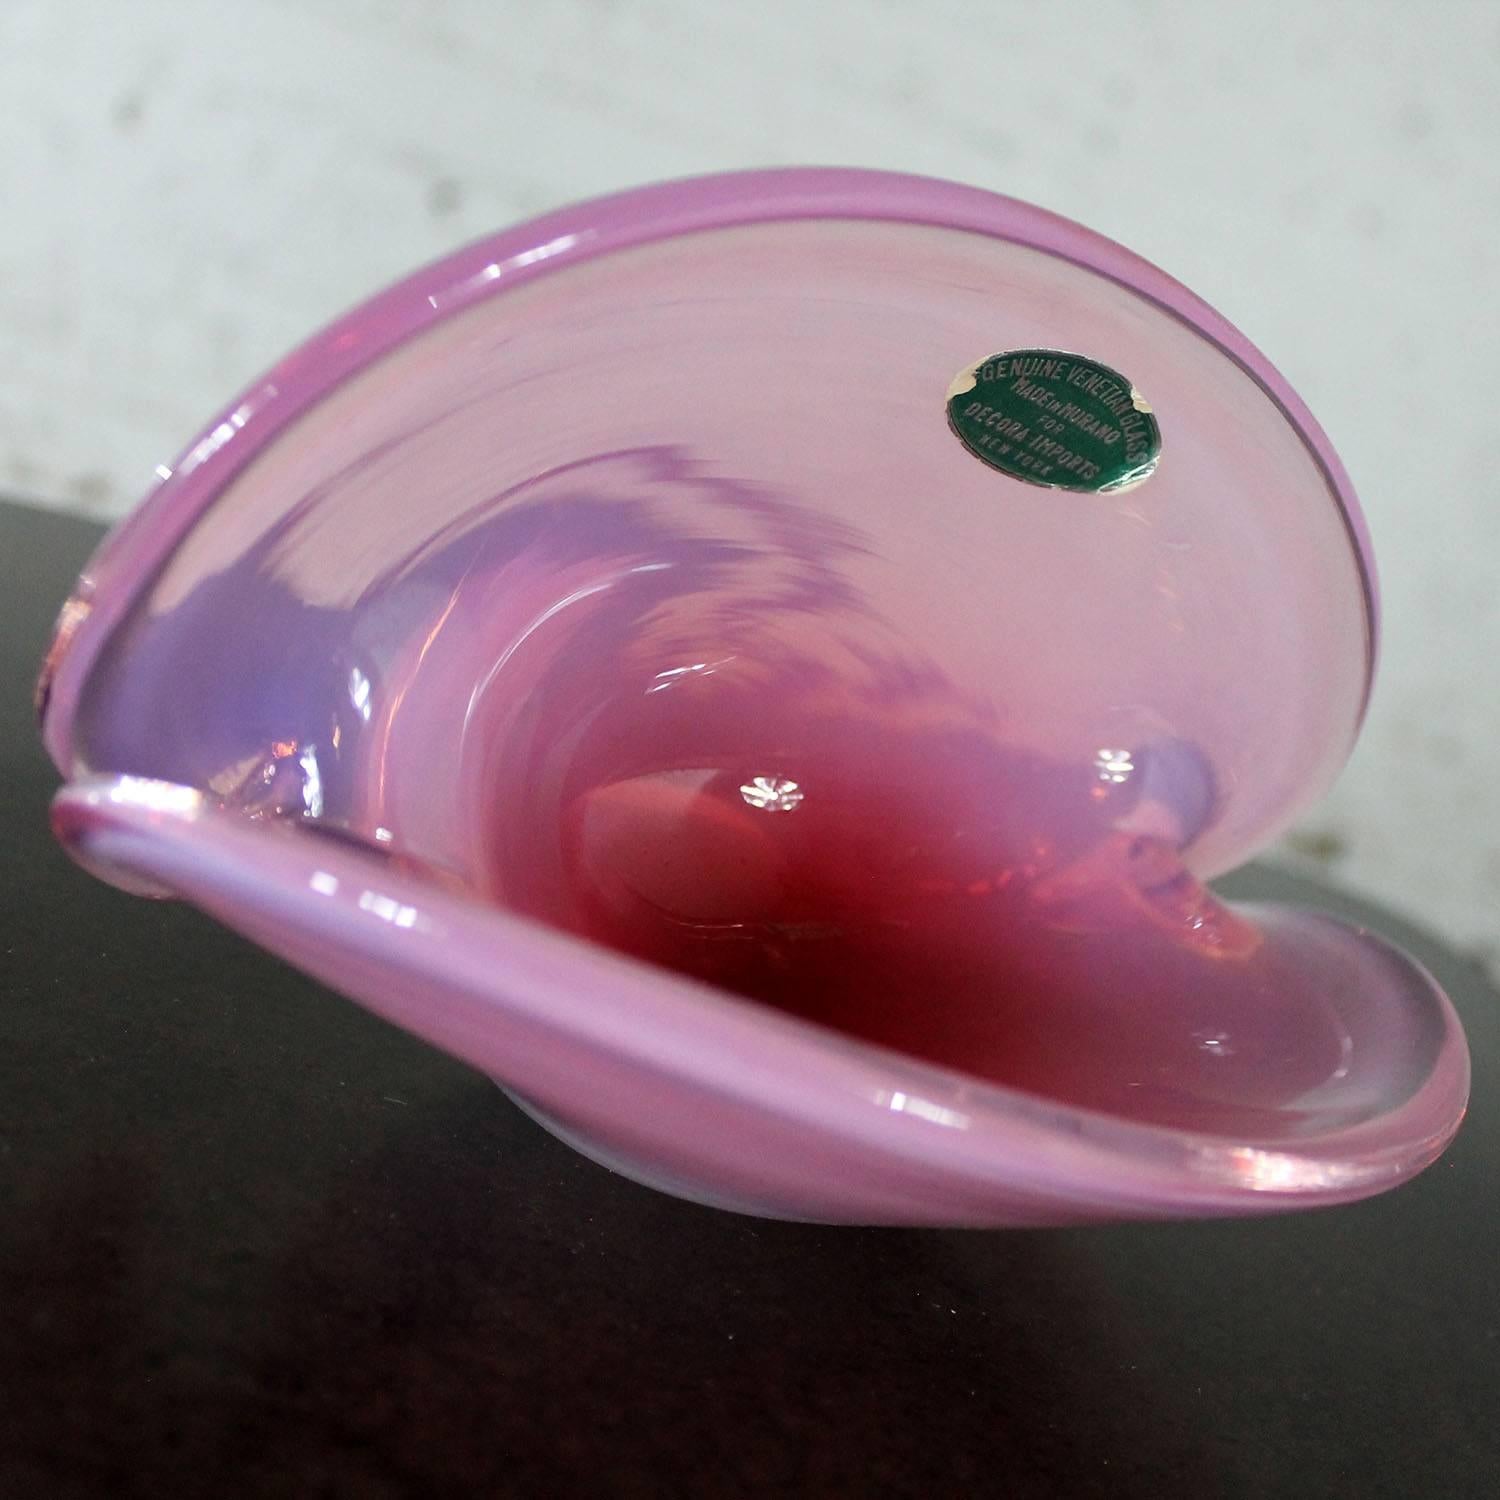 Fabulous opalescent pink clamshell Murano glass bowl with original sticker from Decora Import. Vintage Mid-Century Modern and in wonderful condition with no chips, cracks, or chiggers.

This beautiful pink and wonderfully luminous and opalescent